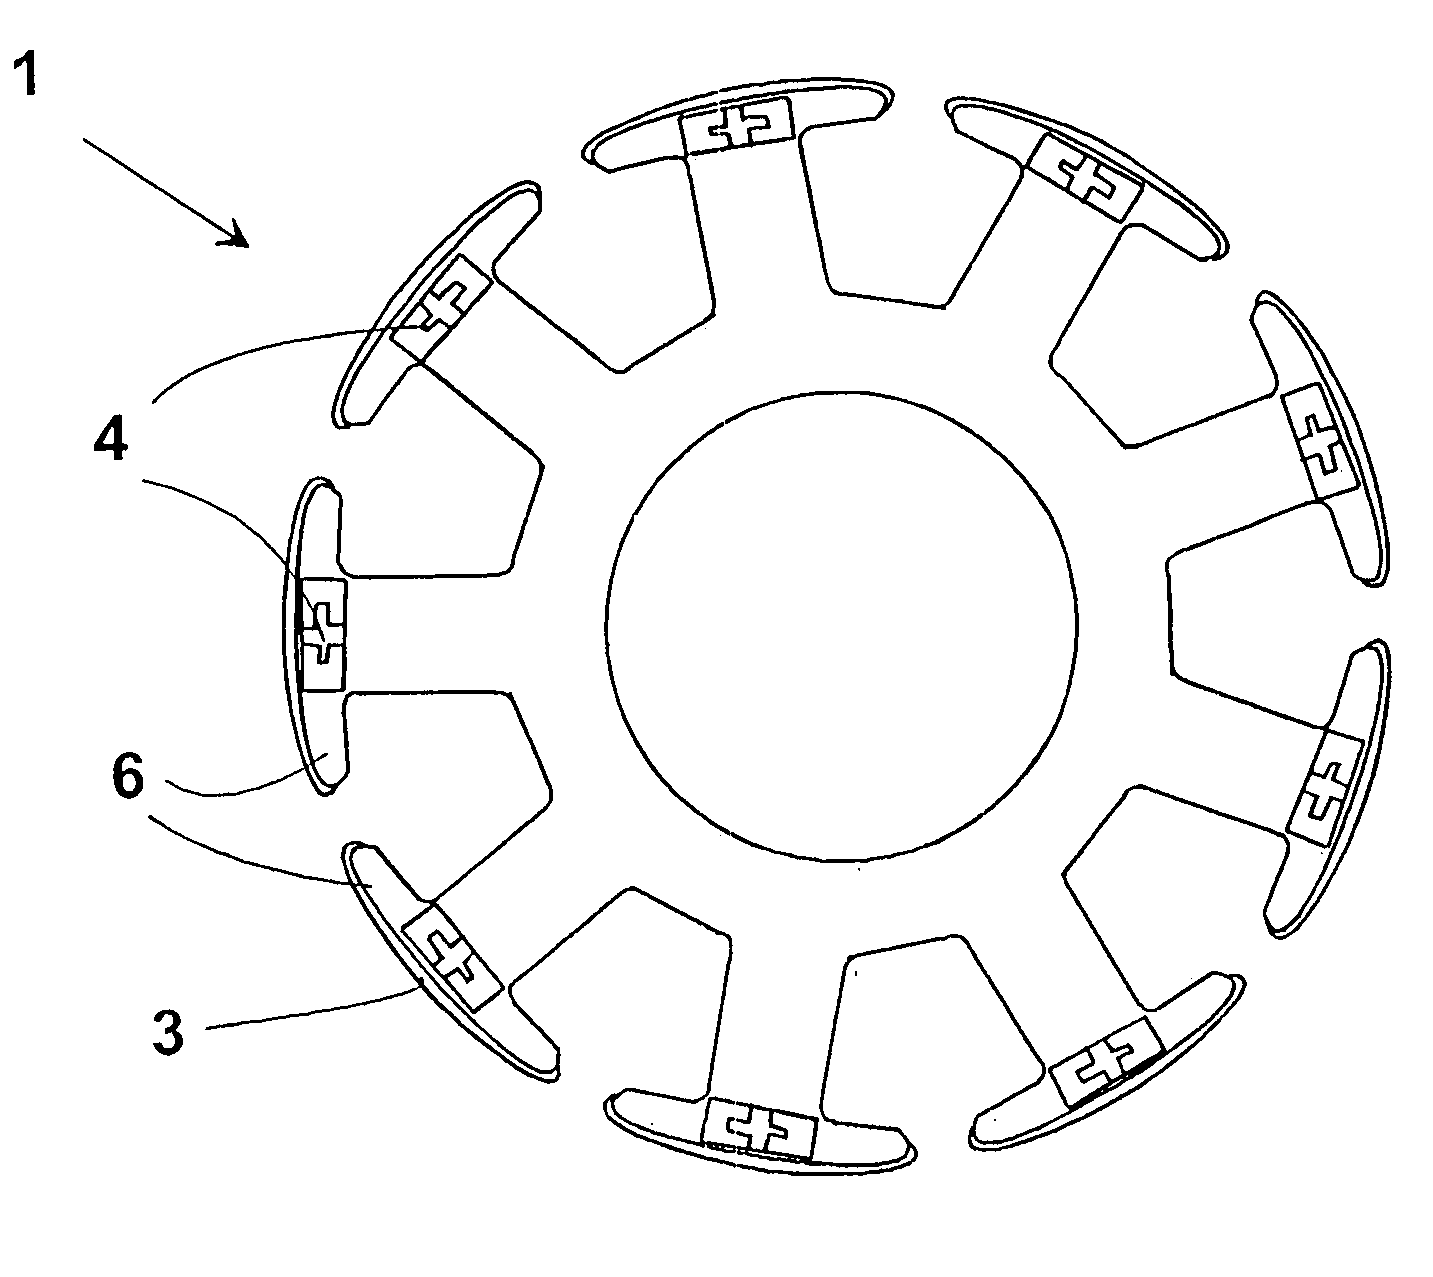 Method and apparatus for wire termination on outwardly spooled multi-pole stators